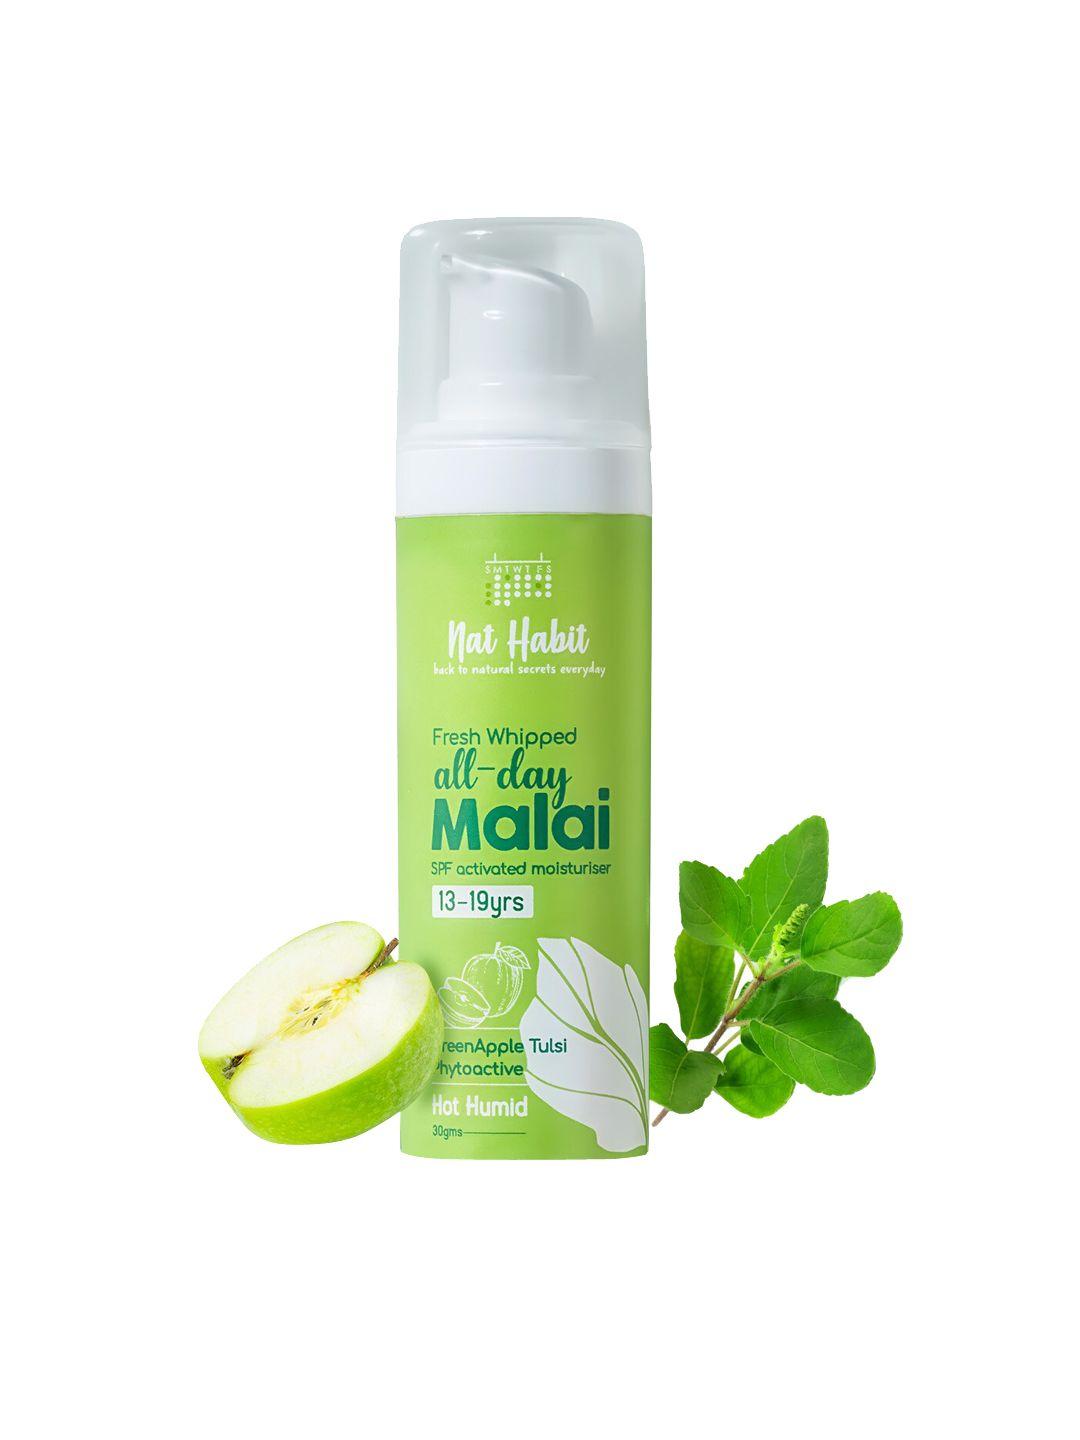 nat habit fresh whipped all day malai moisturizer with green apple & tulsi - 30 g